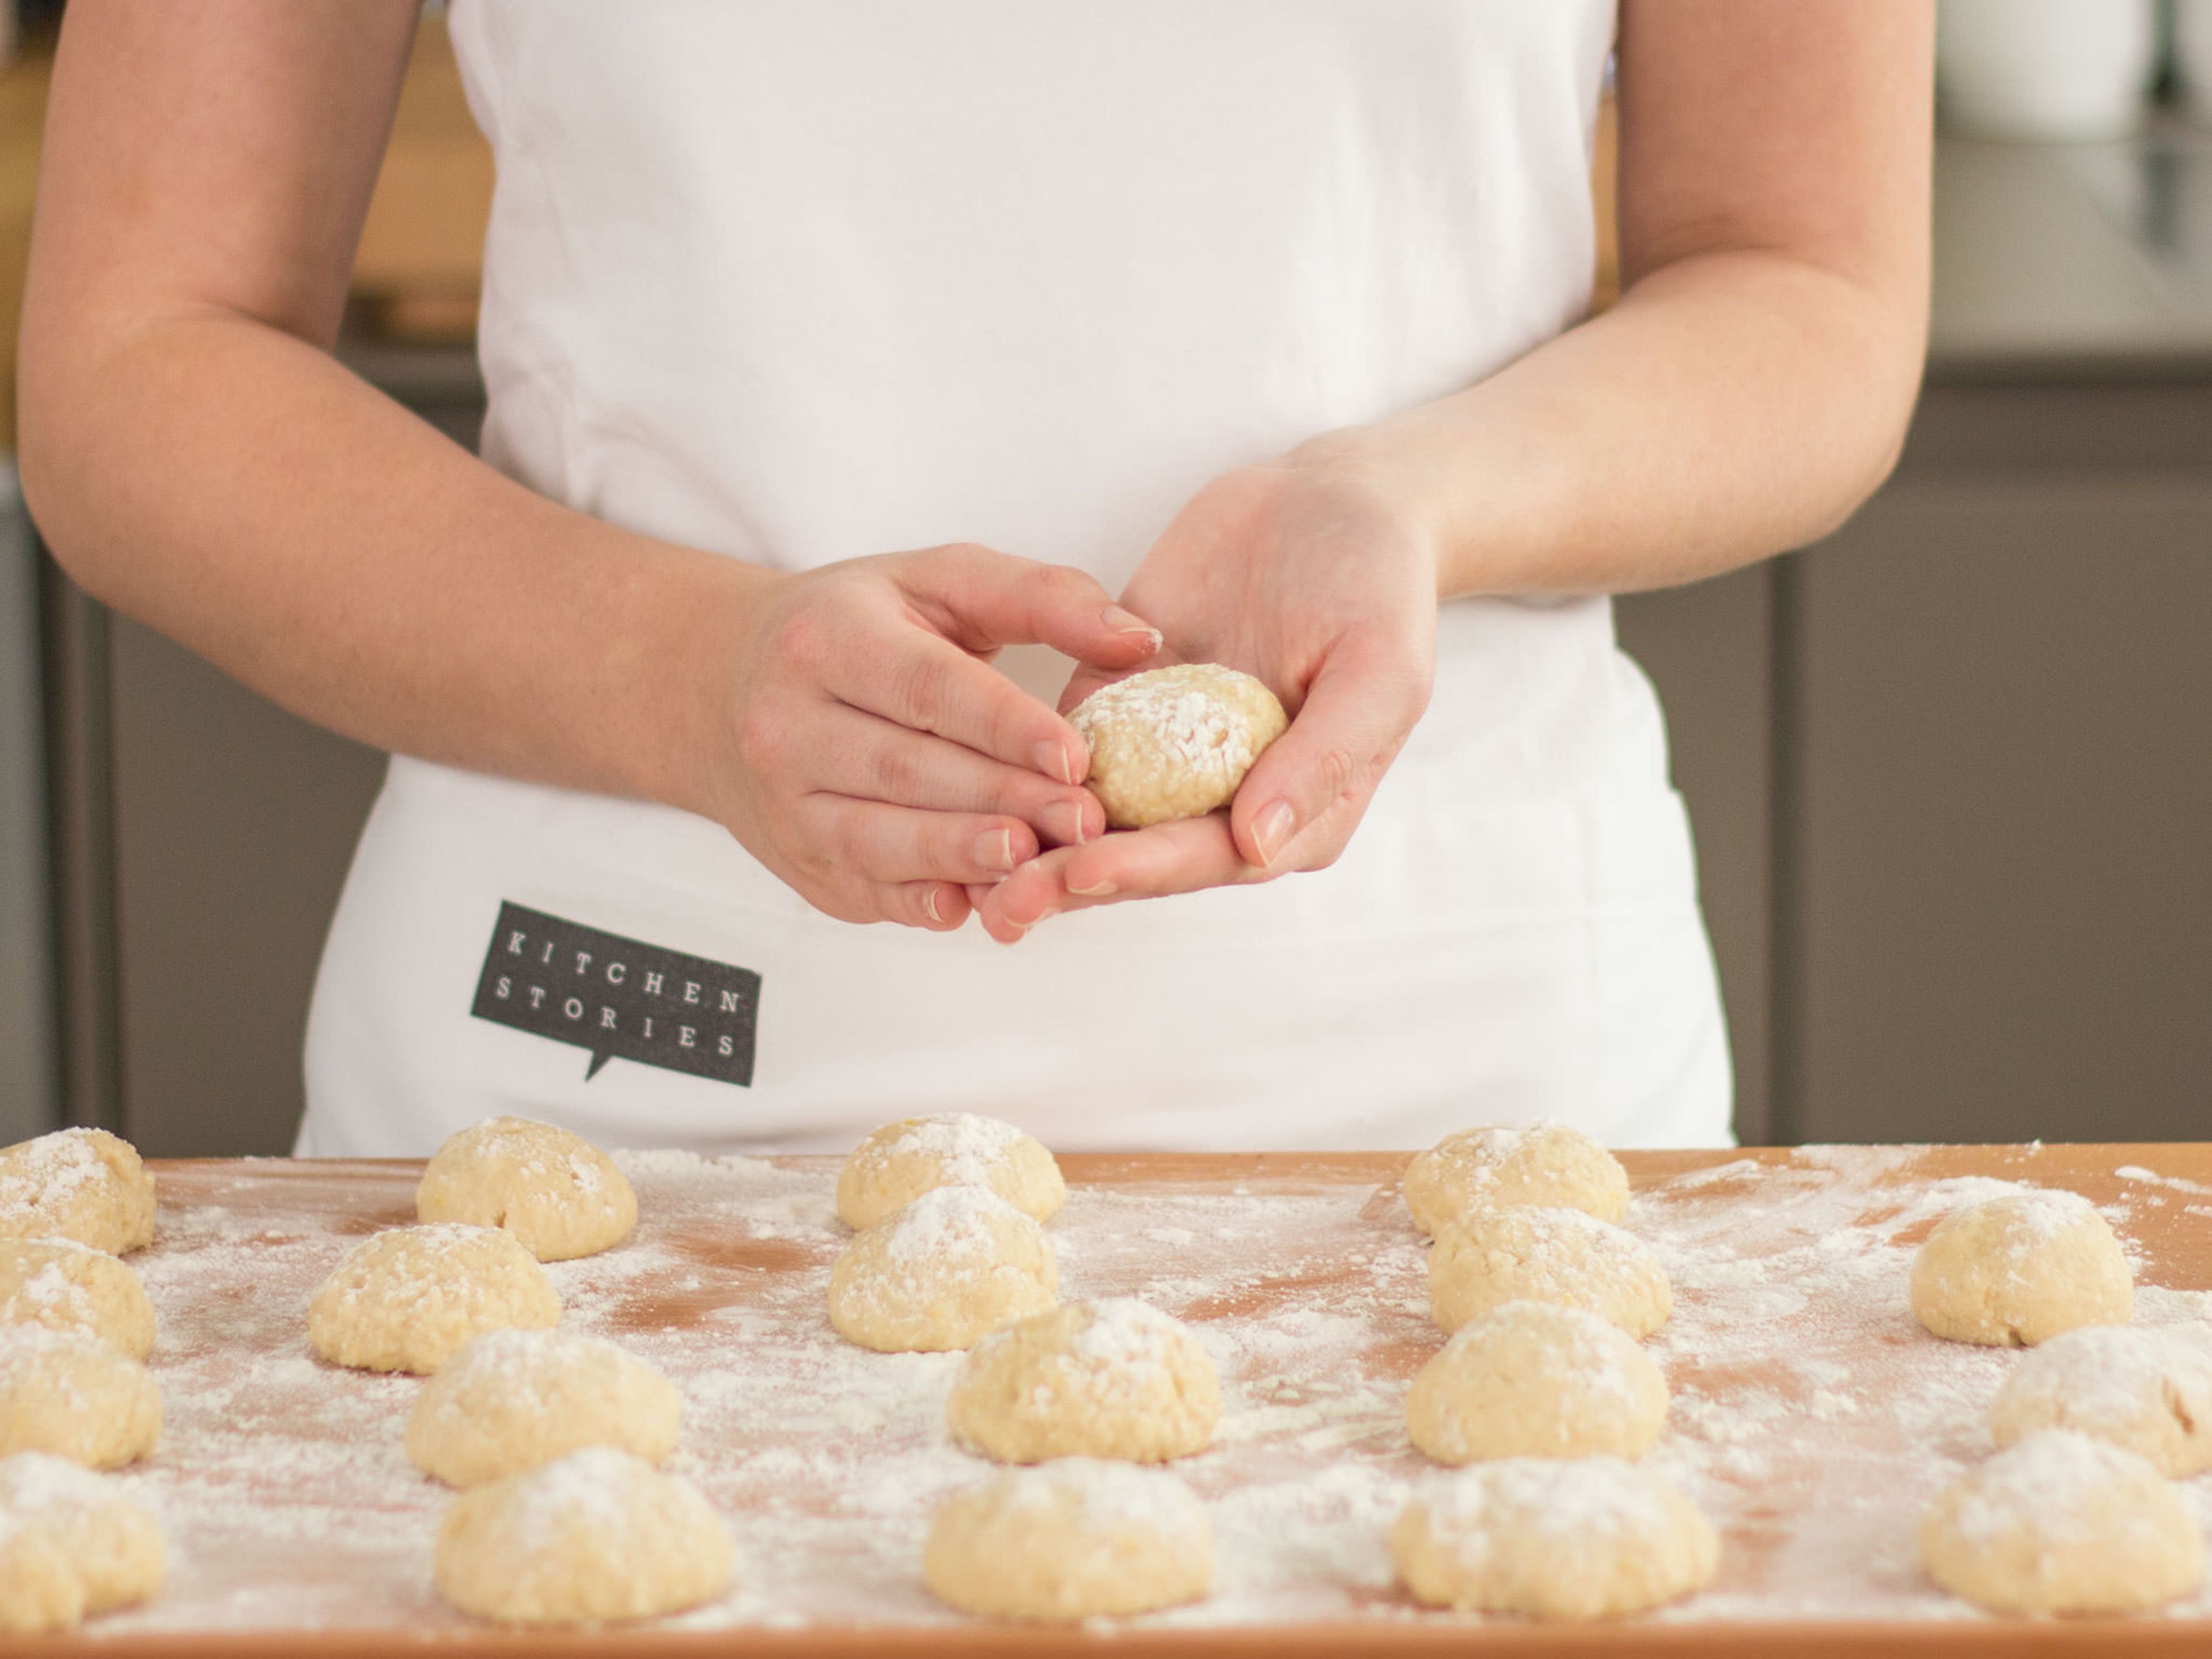 Transfer dough to a floured work surface. Now, form the dough into small, golf ball-sized rounds. Allow to rise for approx. 25 – 30 min. Then, flatten out dough and with a small cookie cutter, cut out the center of the dough. Allow dough to rise for approx. another 50 – 60 min.